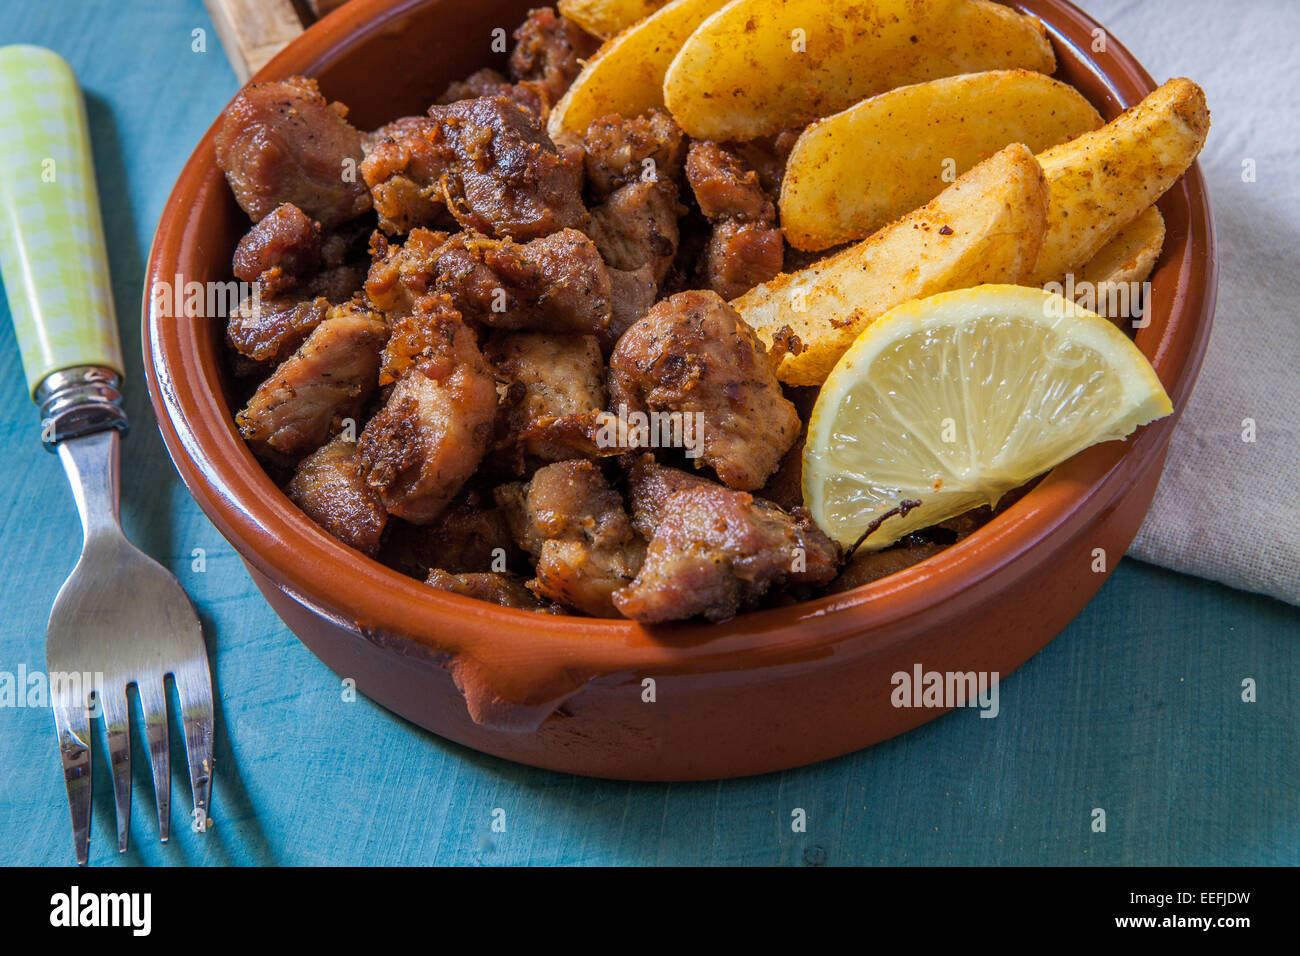 deep fried pork meat with fries and lemon served in clay pot Stock Photo